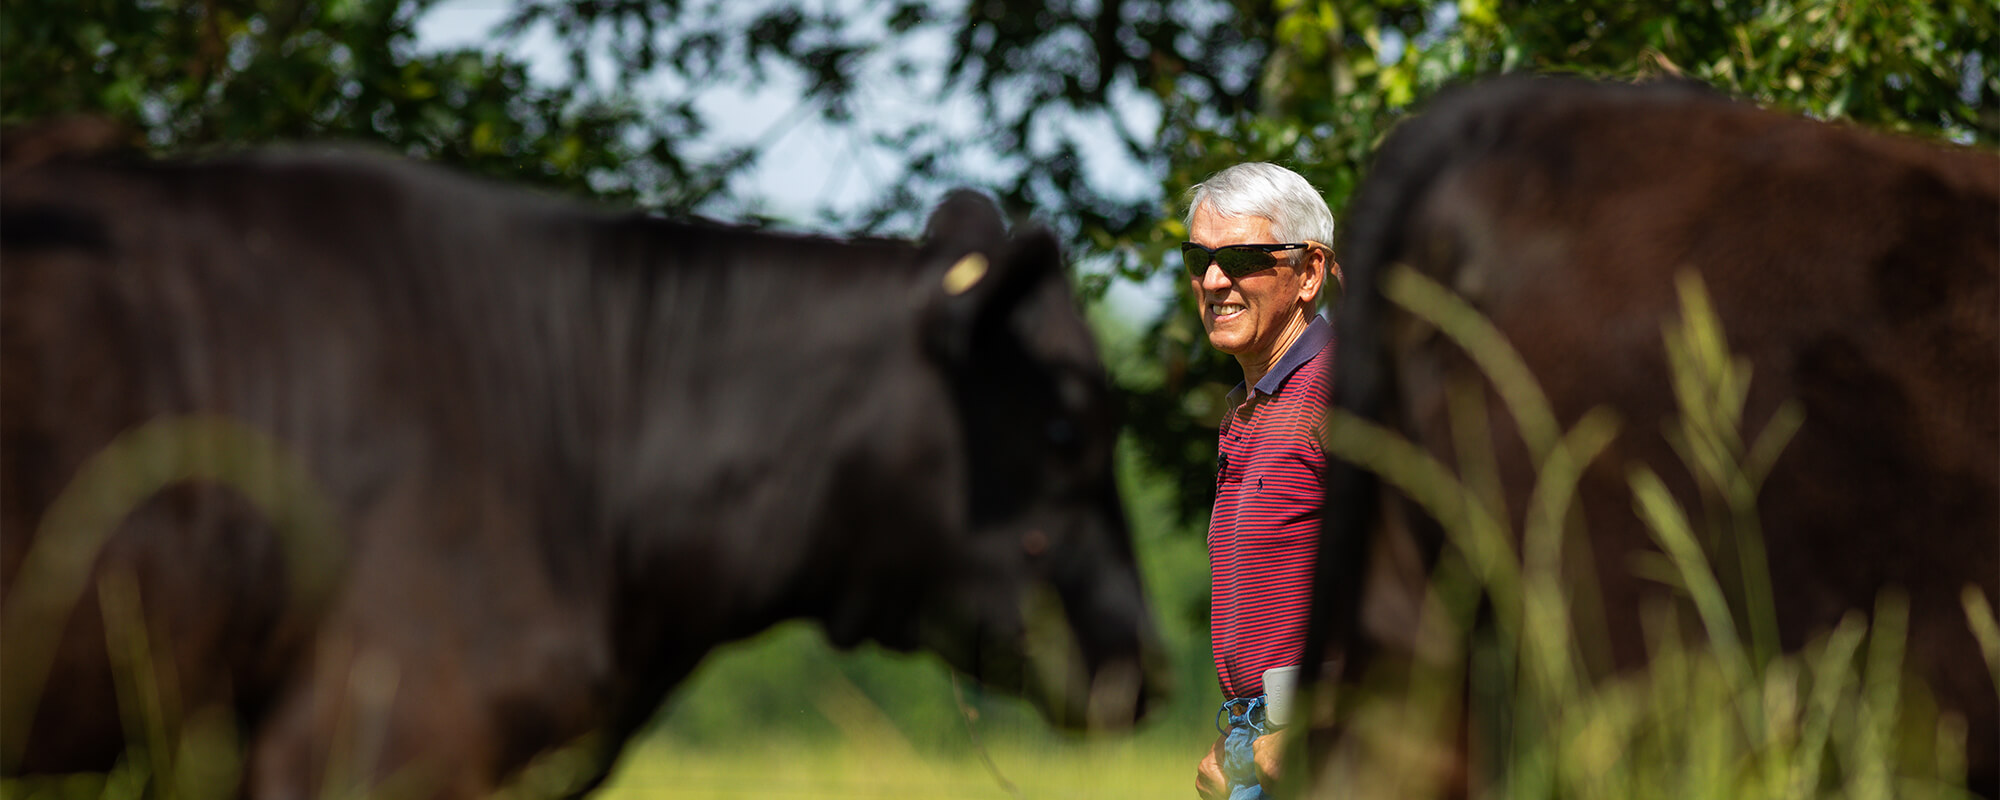 Cooper Hurst has benefited from implementing regenerative practices on his cattle ranch in Woodville, Mississippi. "We really feel like we have become a lot more resilient. We can’t make it rain, but we can make sure rain stays on our farm."